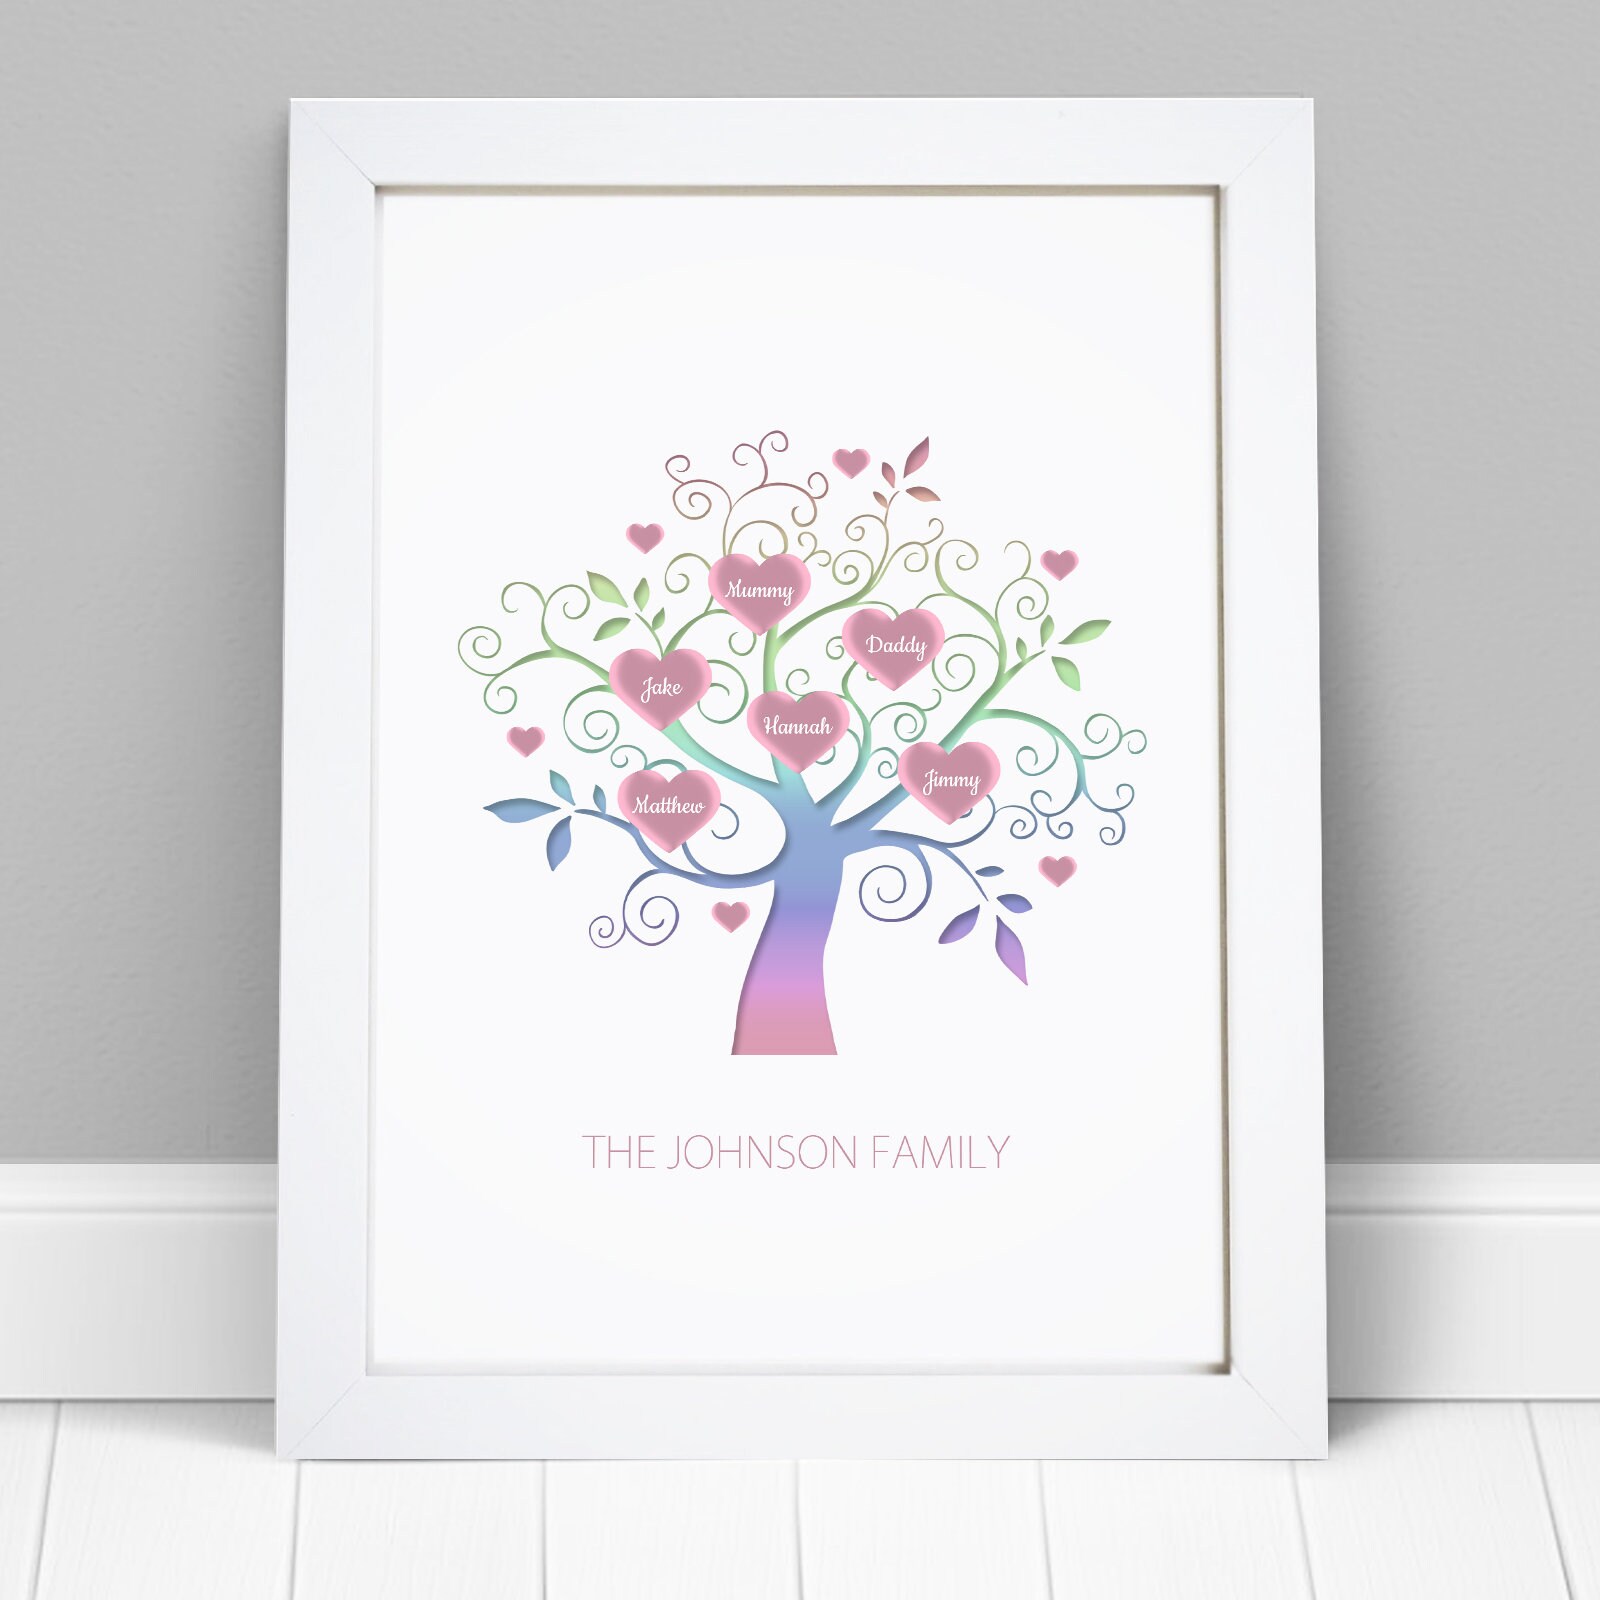 MOTHERS DAY GIFT MUM NAN FAMILY TREE PERSONALISED PRINT A4 UNFRAMED WEDDING HOME 